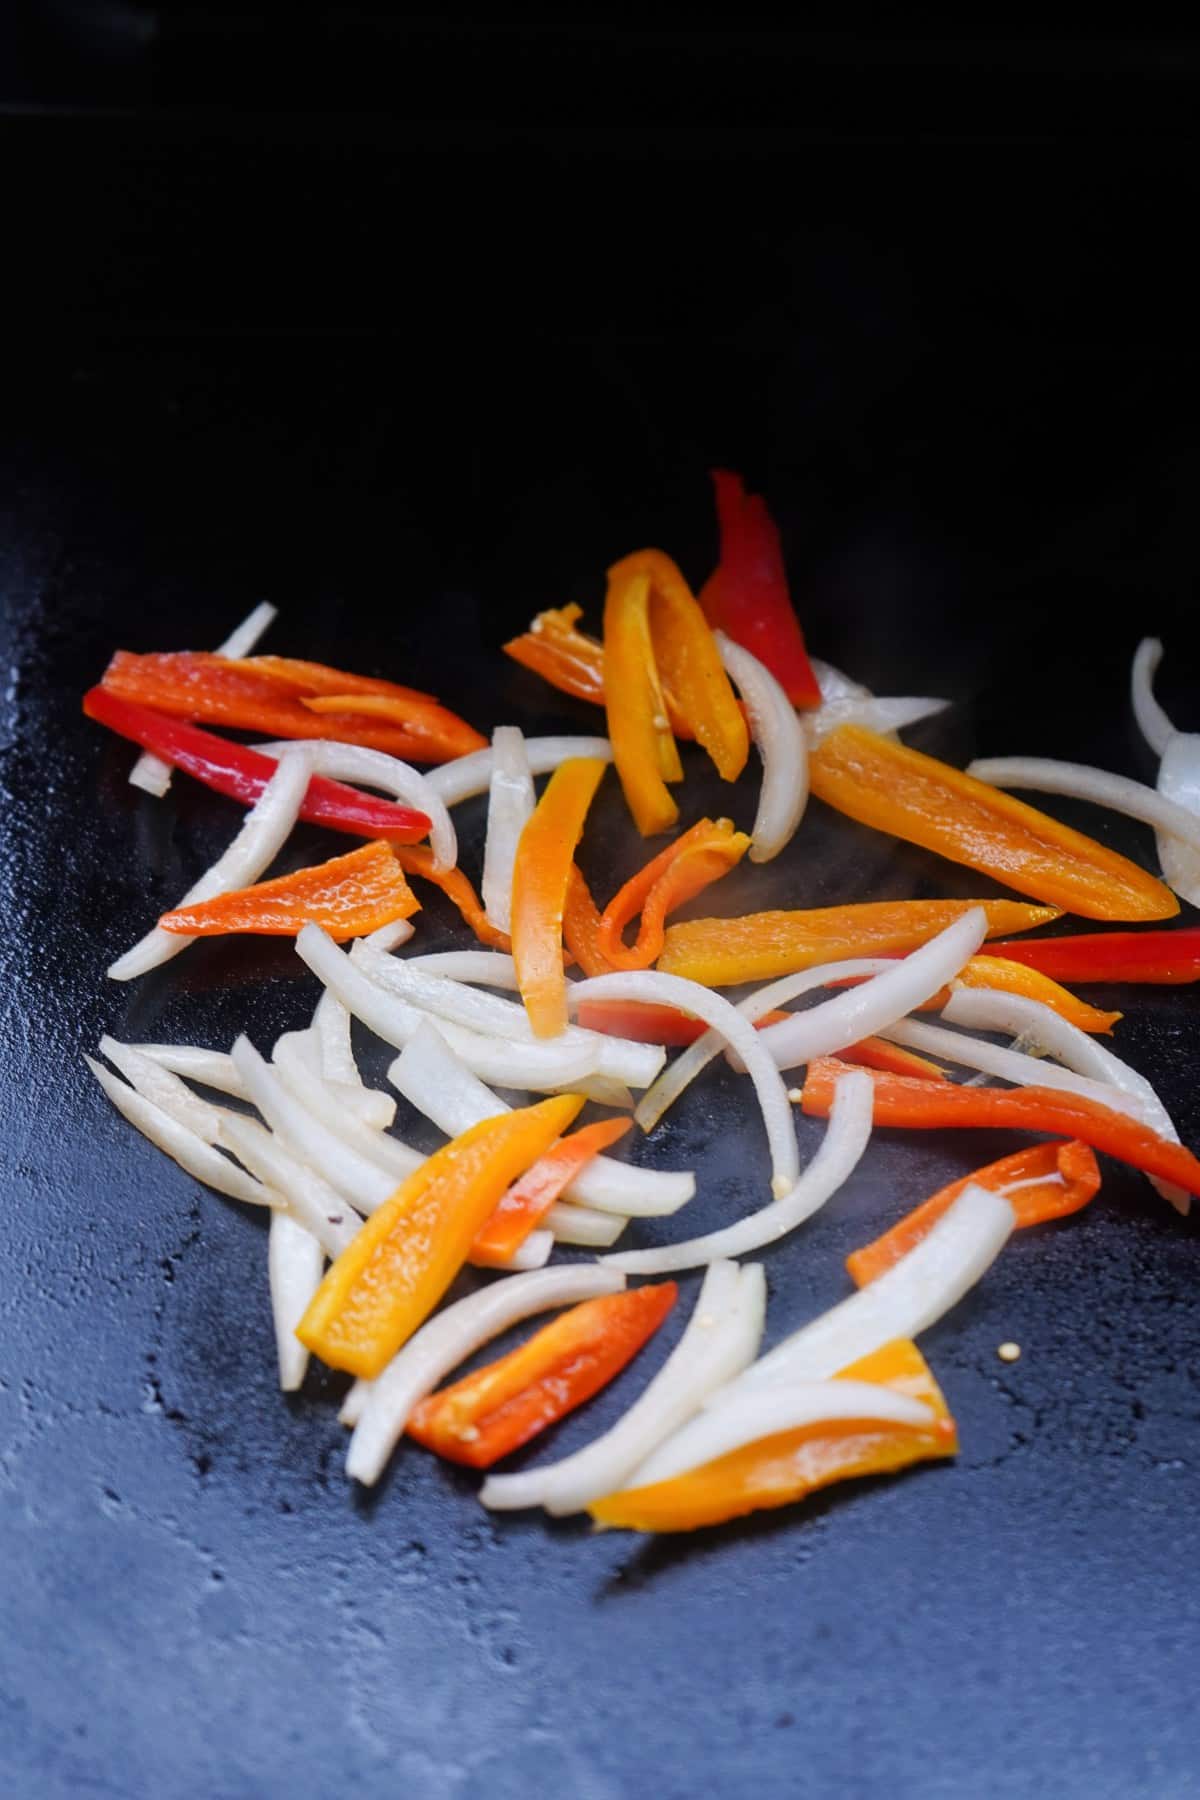 Beer soaked peppers and onion